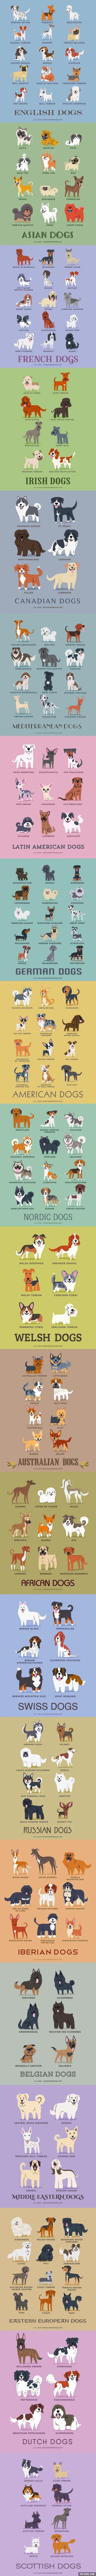 An infographic of Dogs grouped by their geographic location